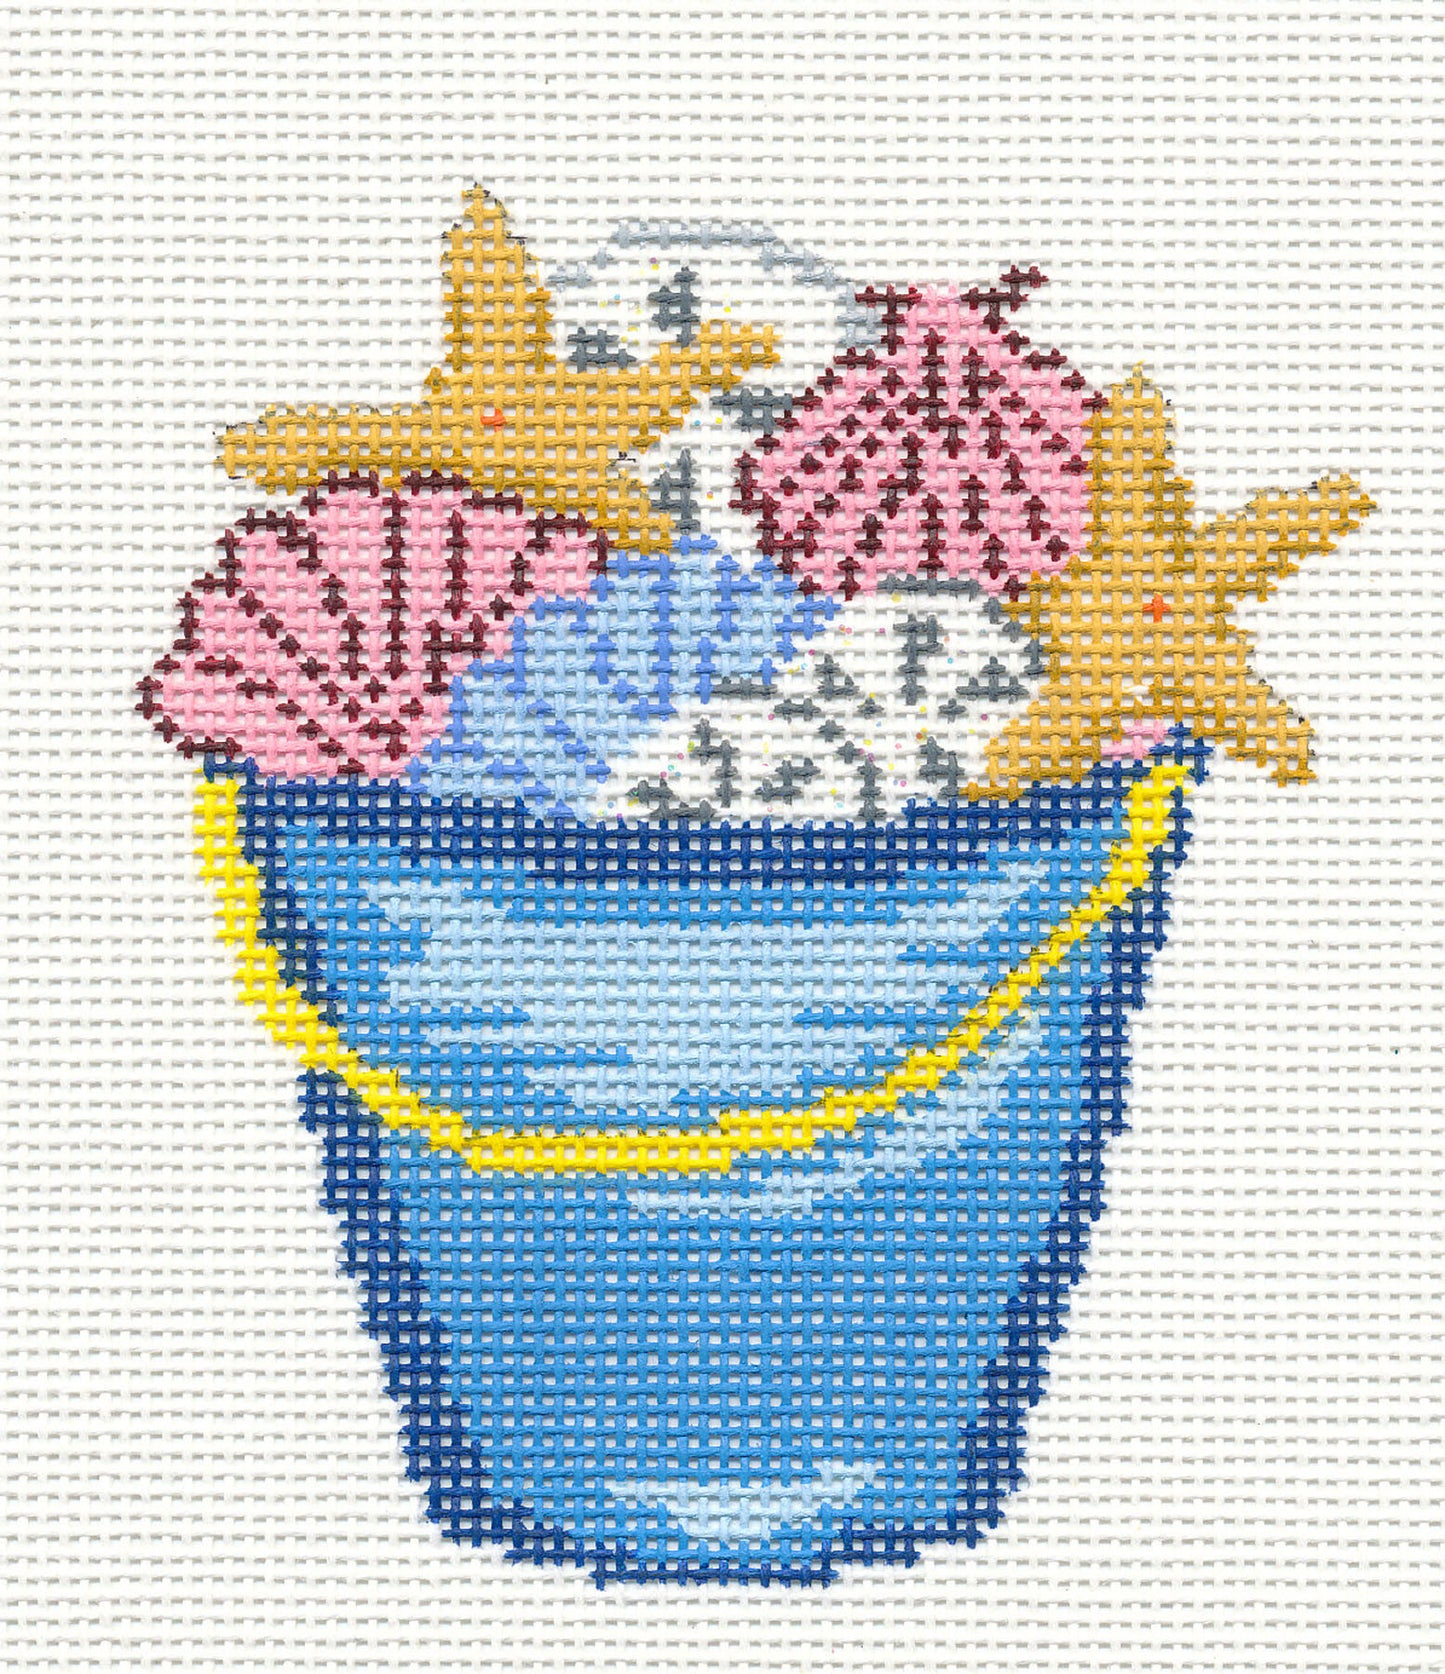 Summer Canvas ~ Summer Blue Beach Bucket filled with Shells 18 mesh handpainted Needlepoint Canvas by Needle Crossings